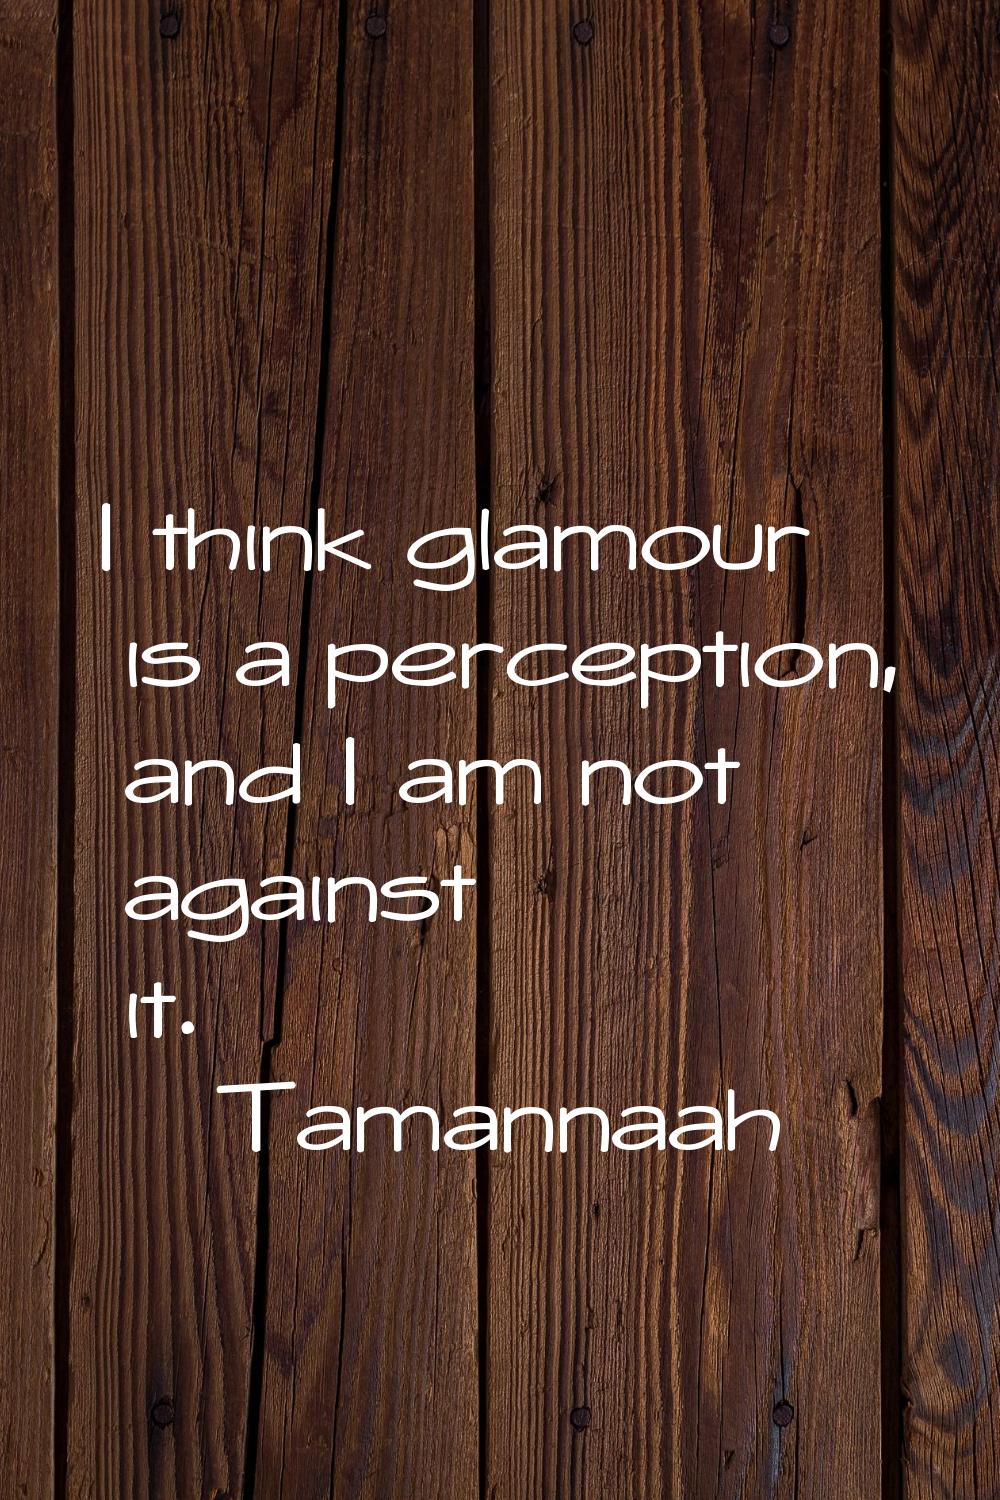 I think glamour is a perception, and I am not against it.